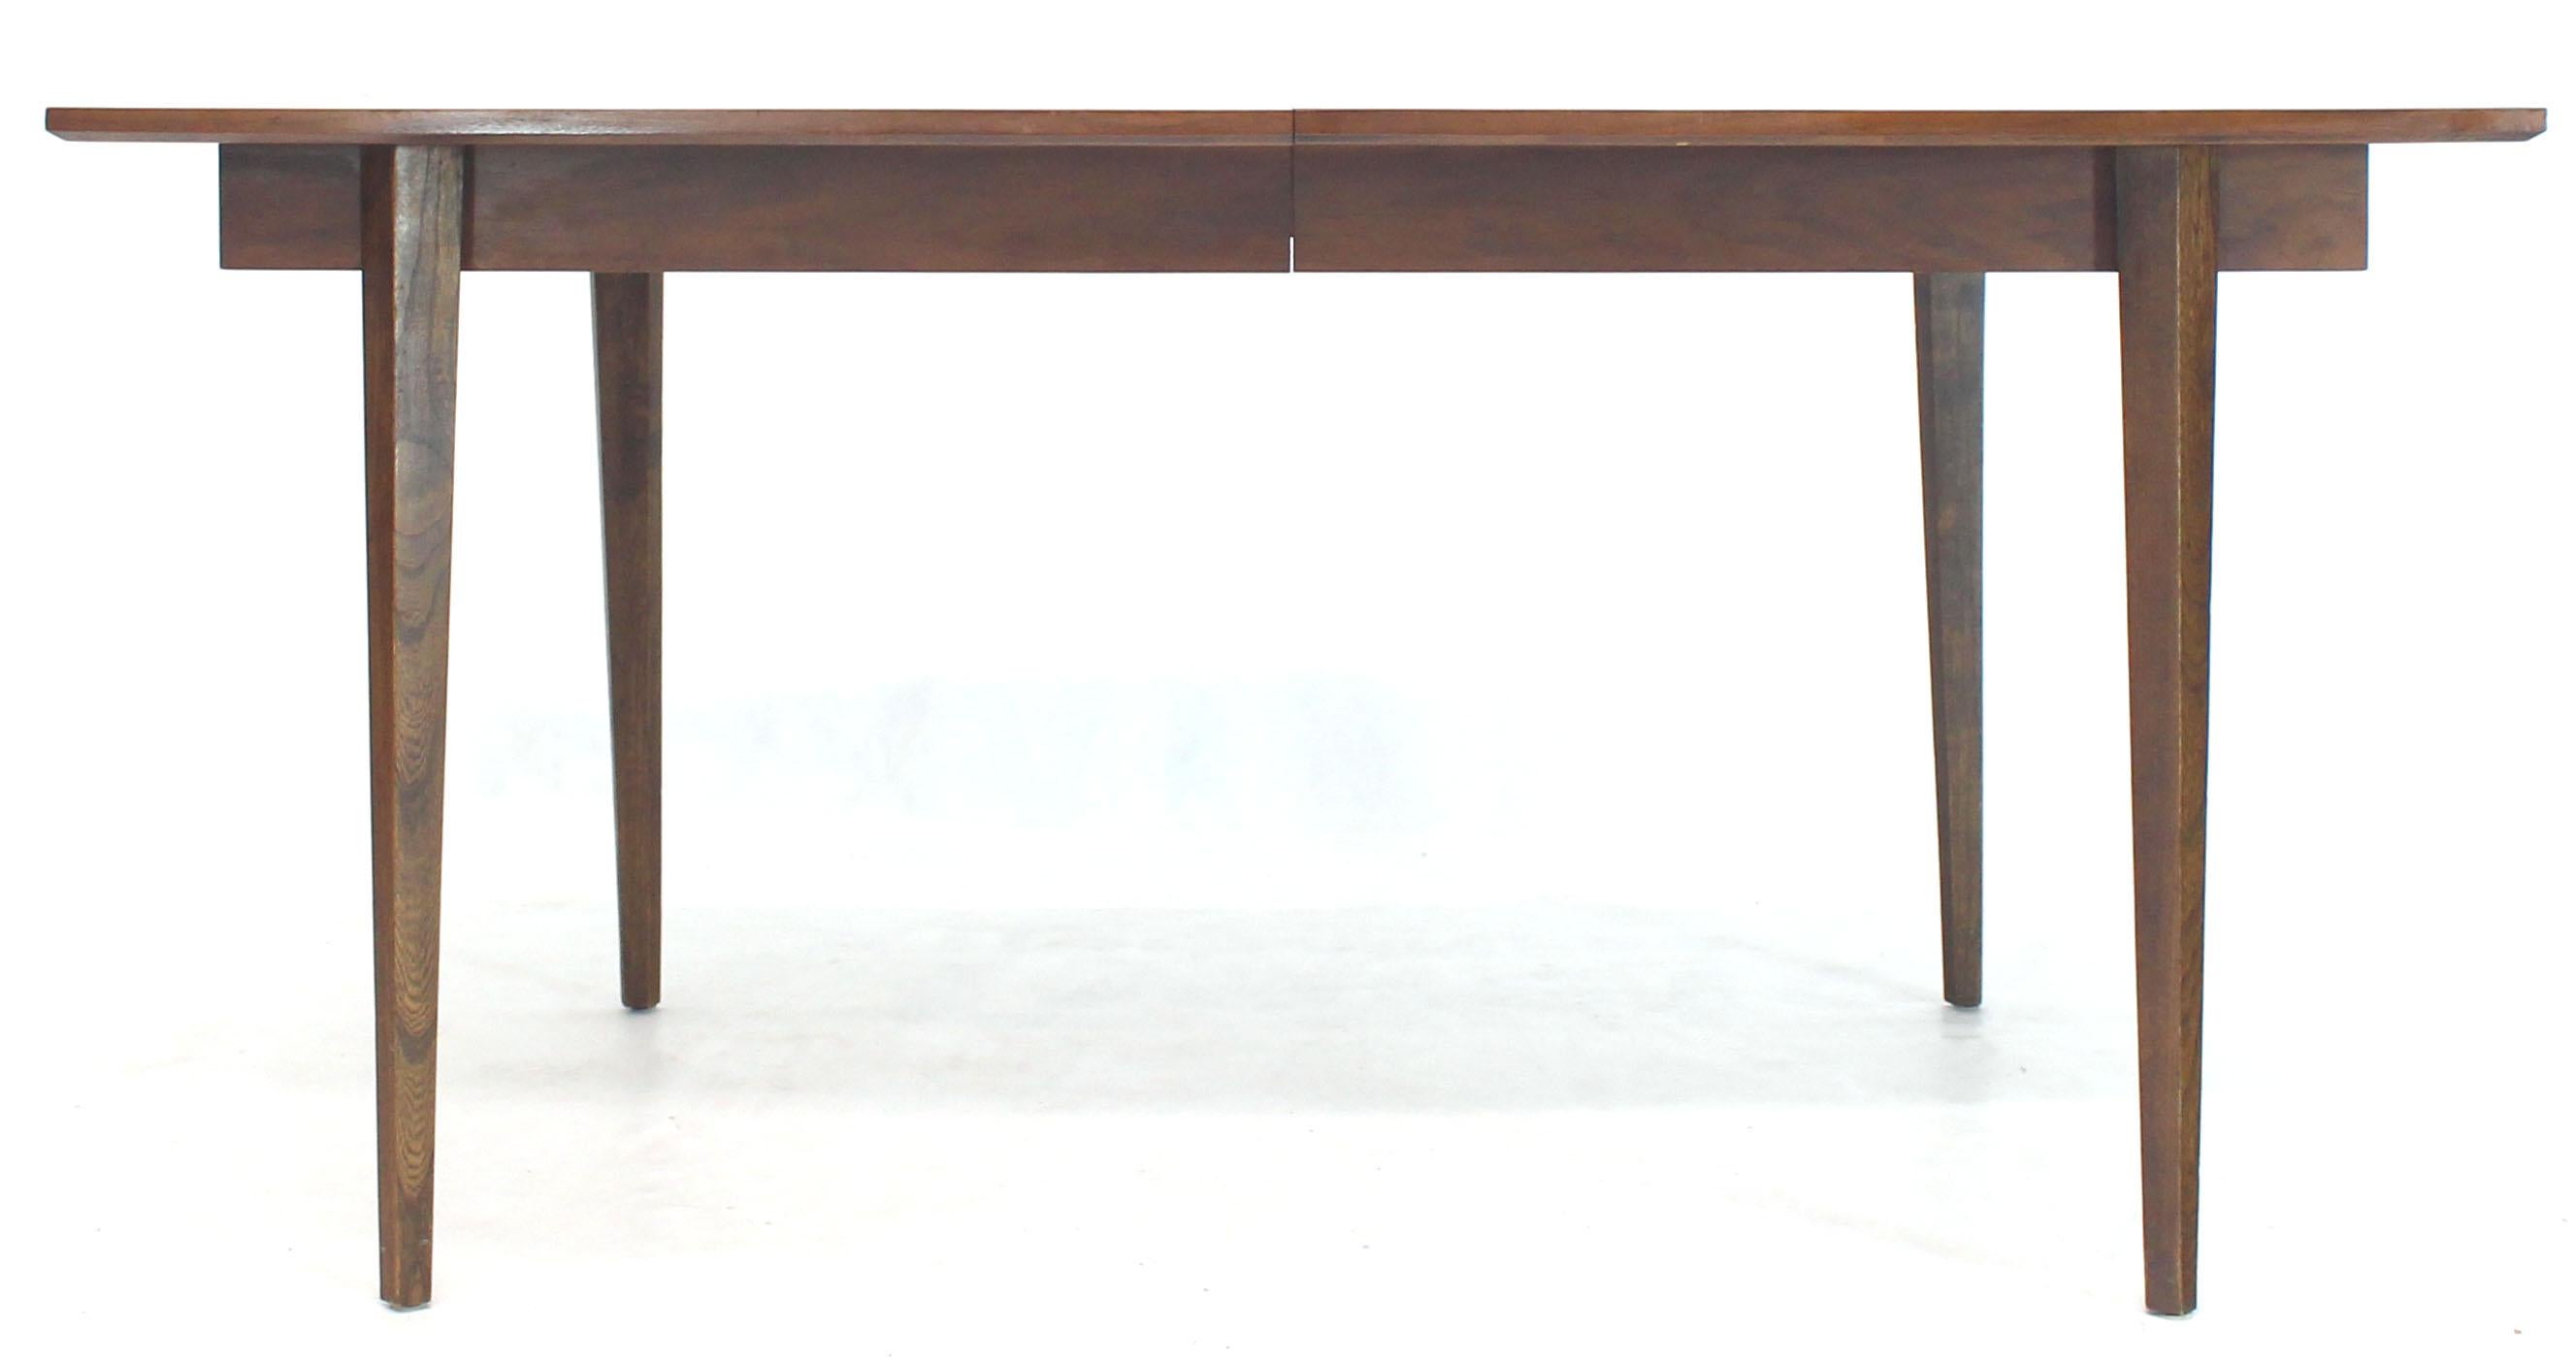 Danish Mid-Century Modern Walnut Wide Rectangle Dining Table 2 Extension Boards In Good Condition For Sale In Rockaway, NJ